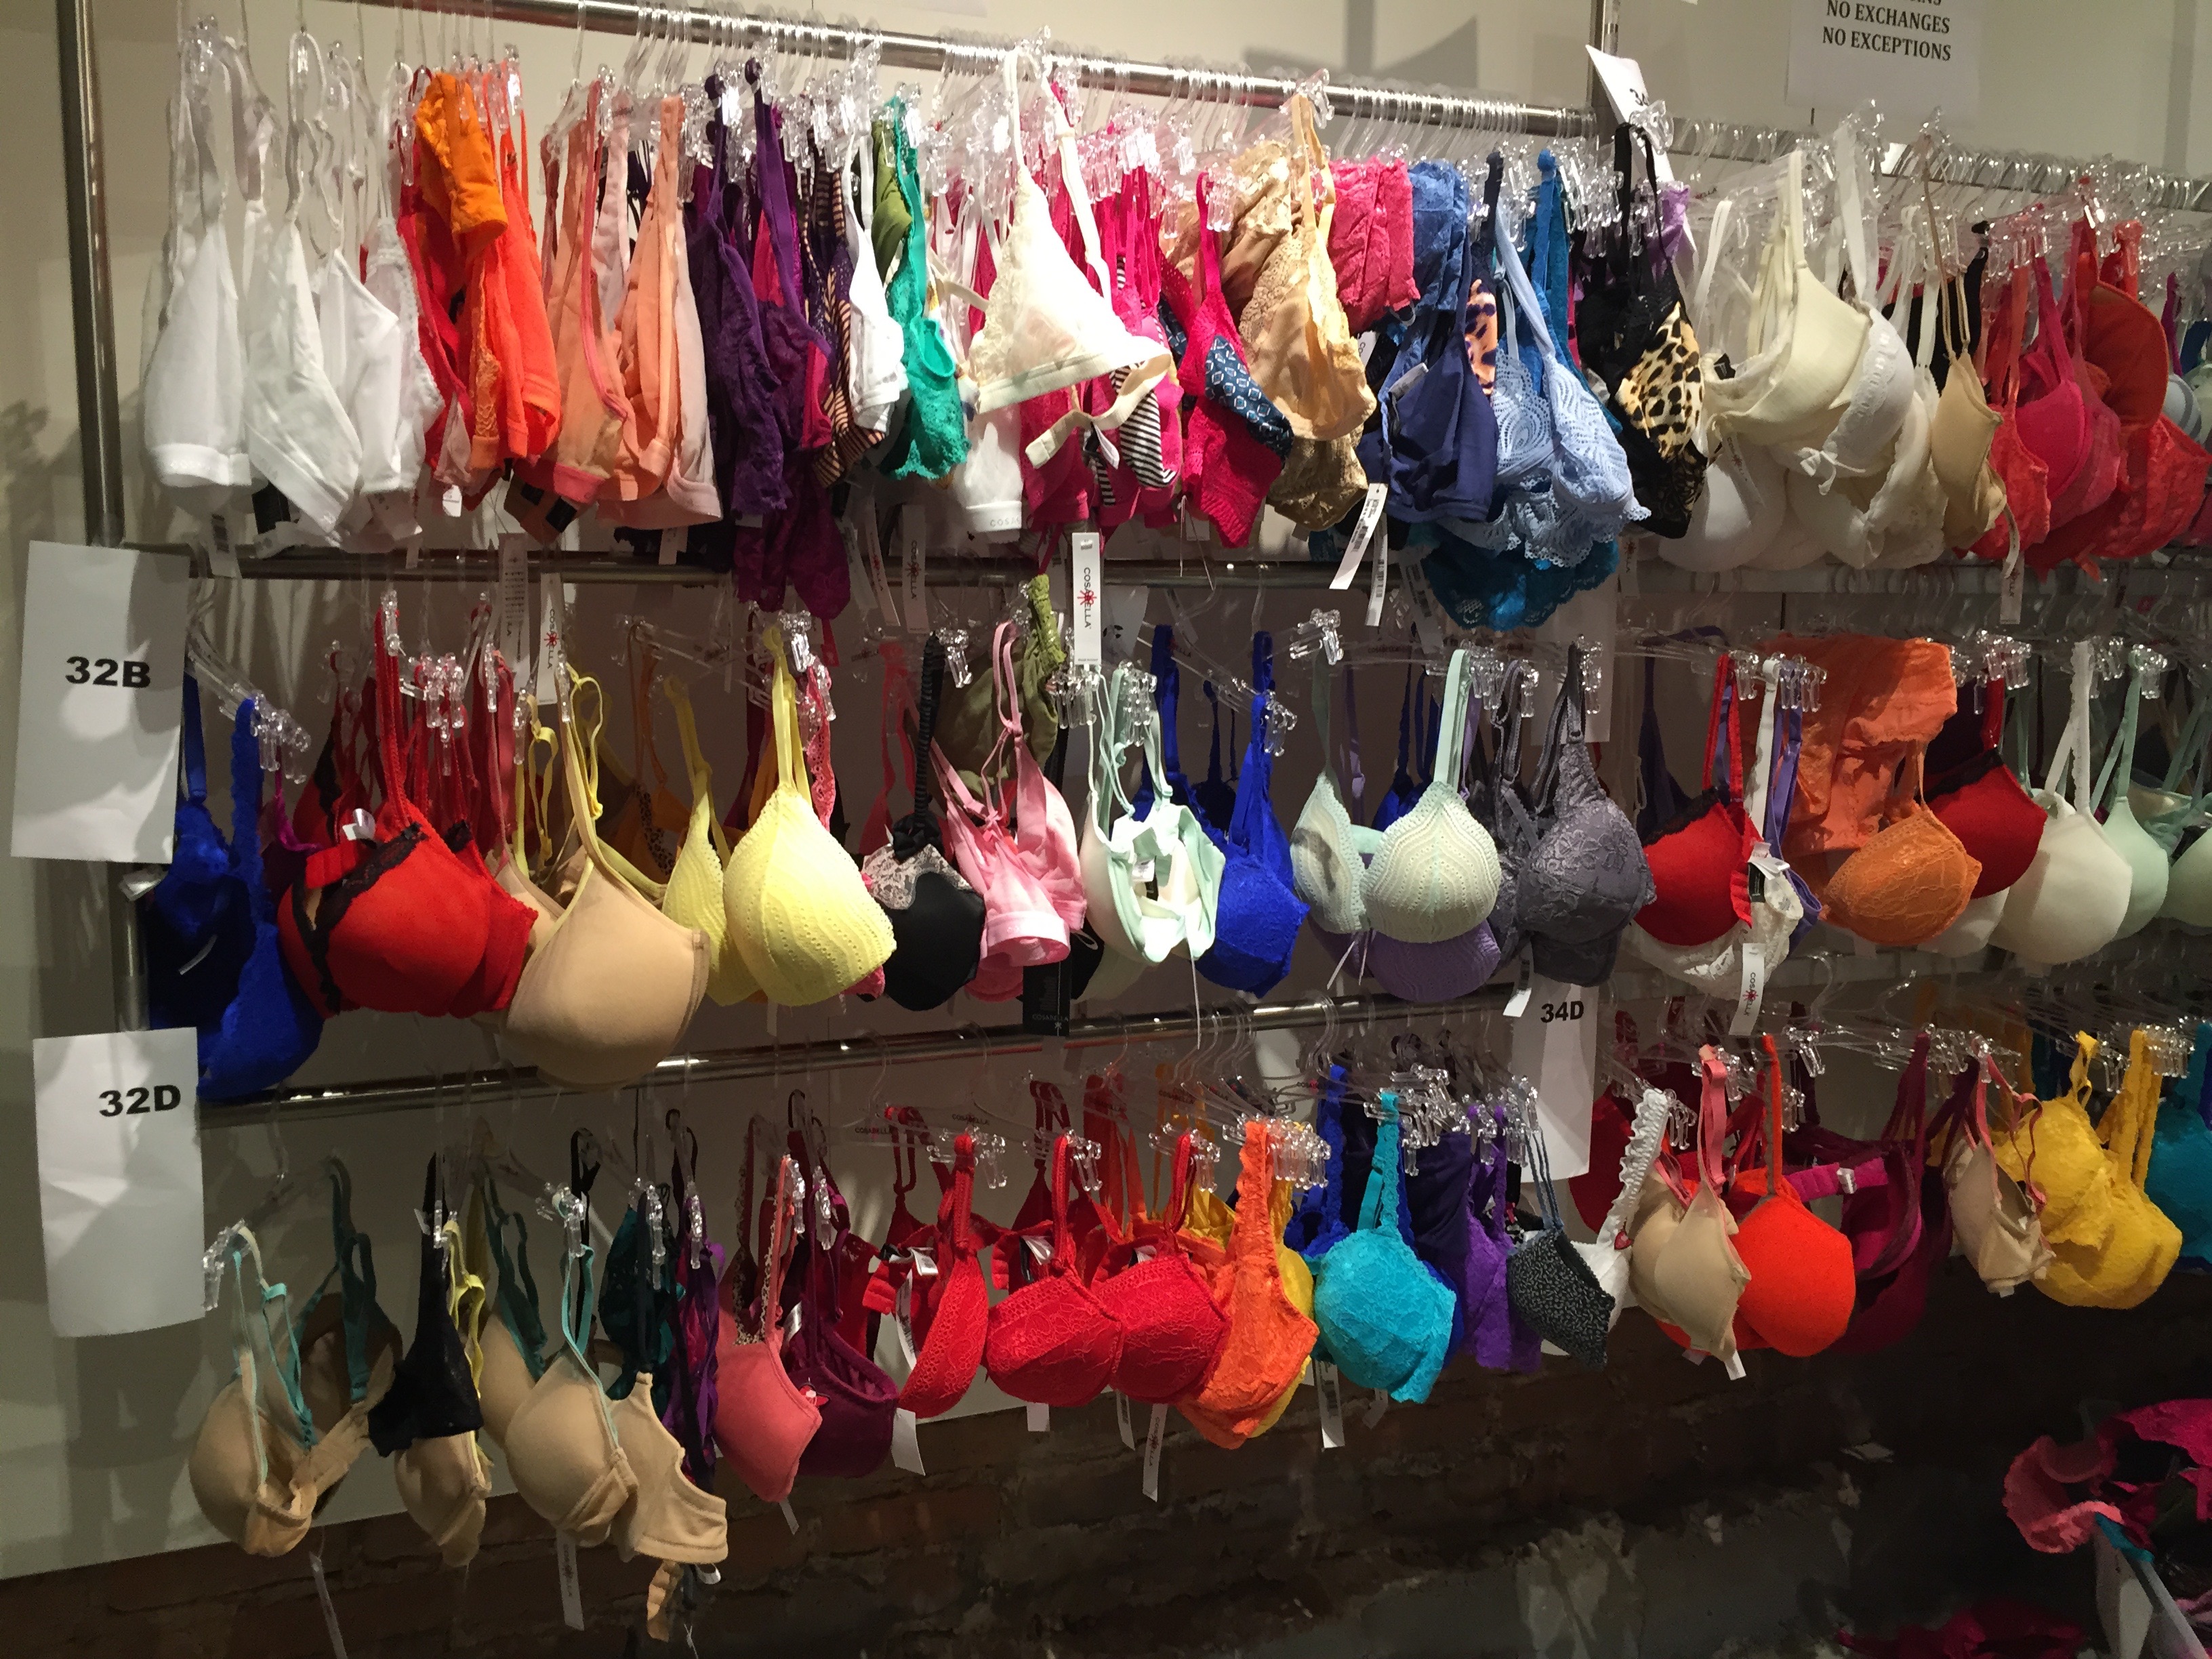 The bra selection as of Monday evening